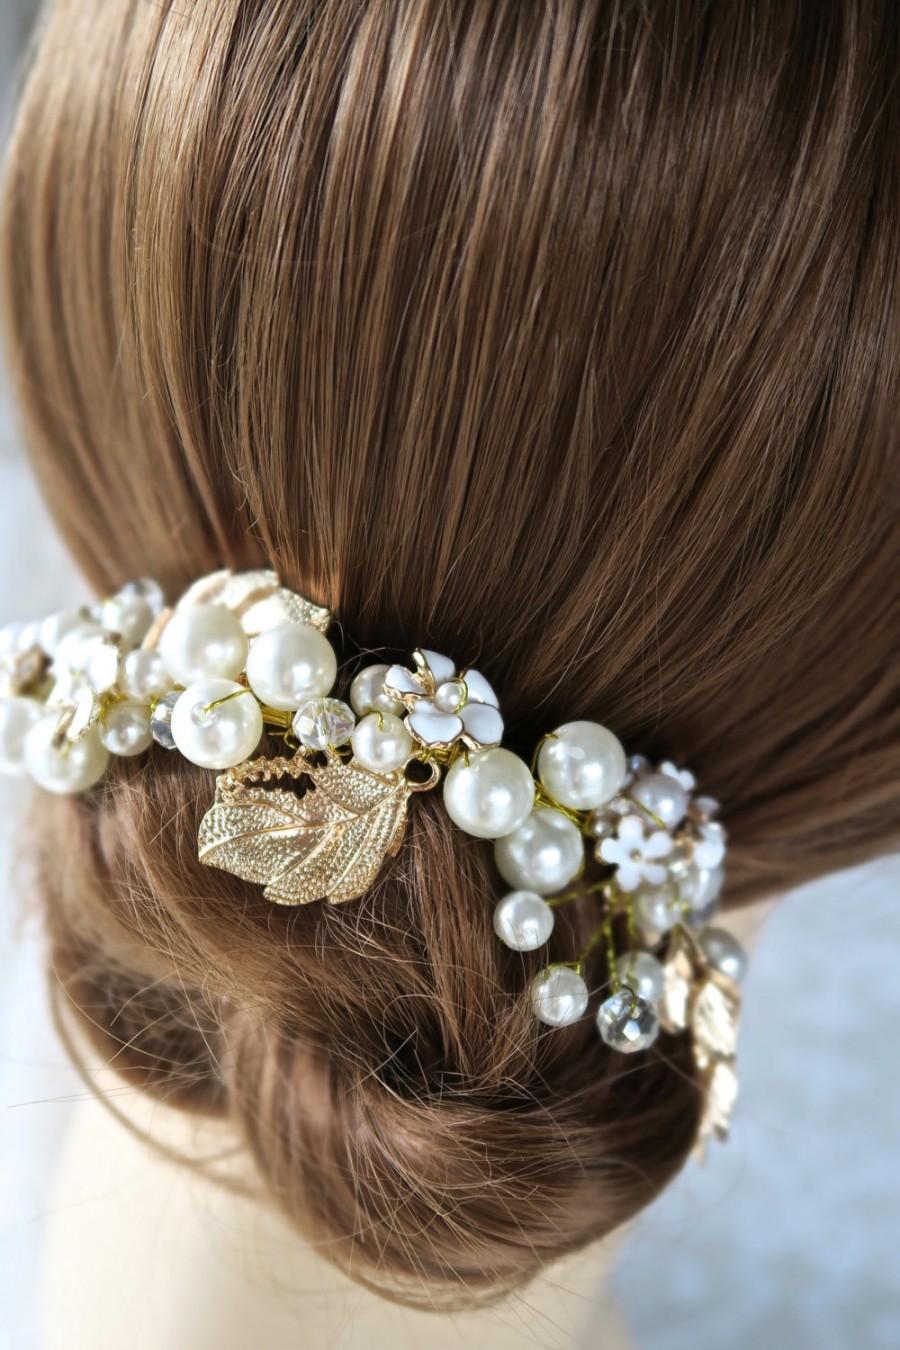 Mariage - Bridal headband, Gold headpiece, Wedding hair accessories,pearls and gold hairpiece, Bridal headpiece Wedding hair vine bridal band